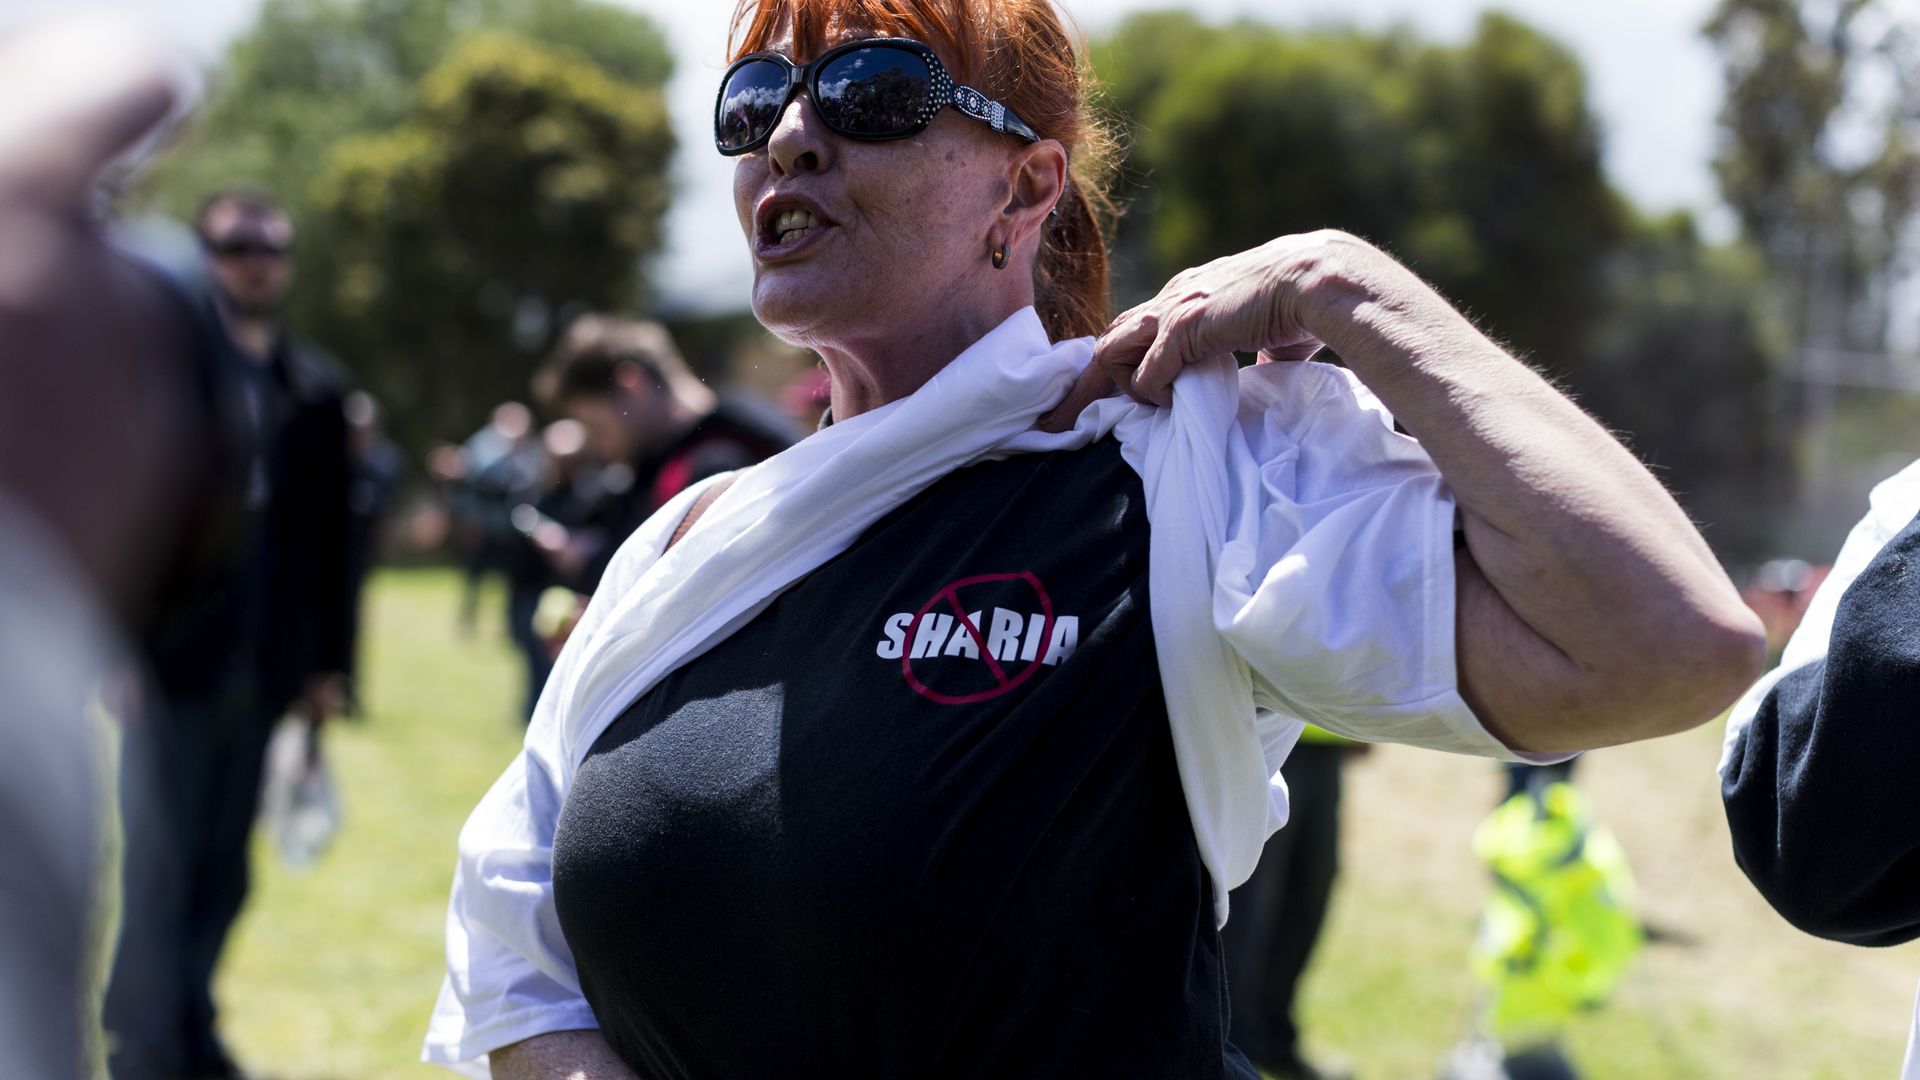 A woman reveals a shirt under her sweatshirt that has a red "no" symbol over the word Sharia. 